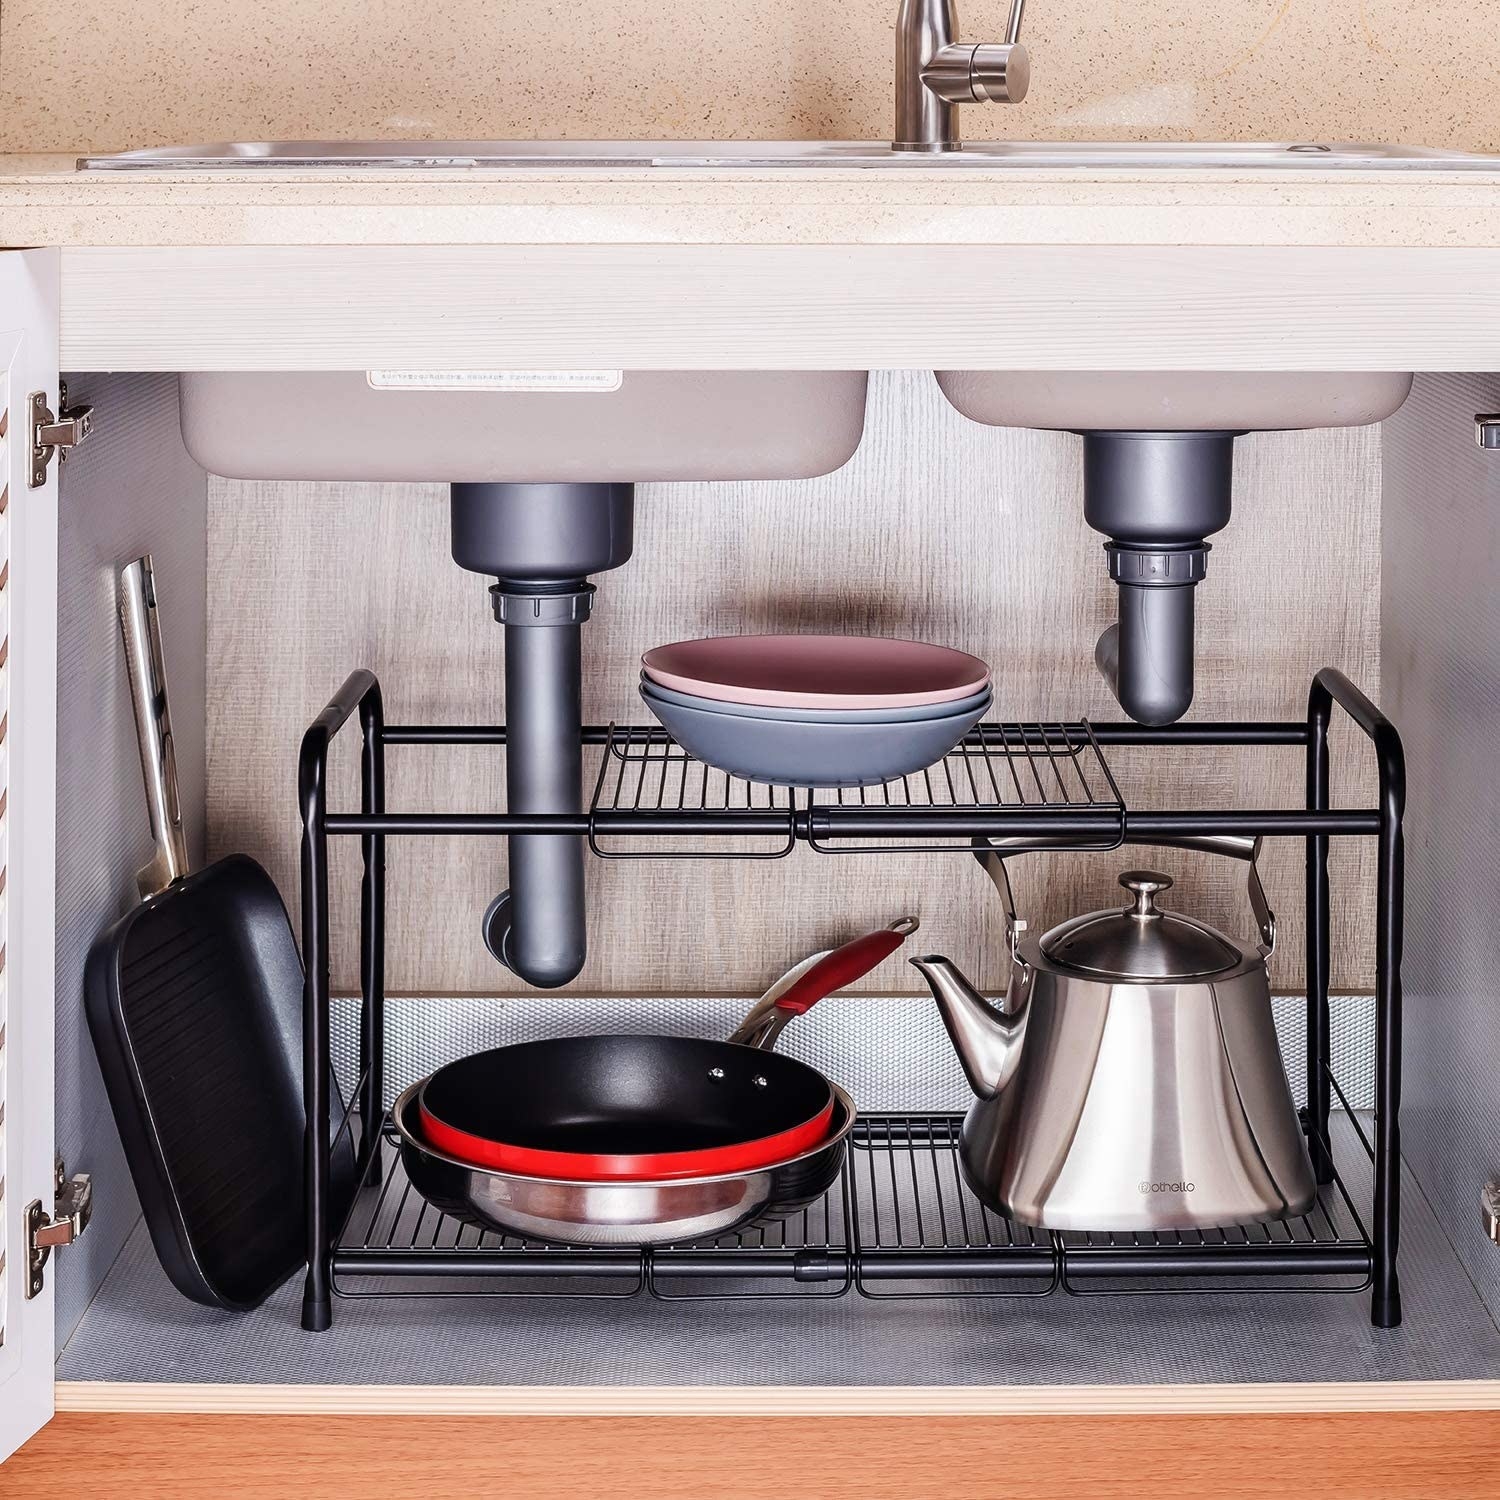 the expandable metal rack underneath a kitchen sink